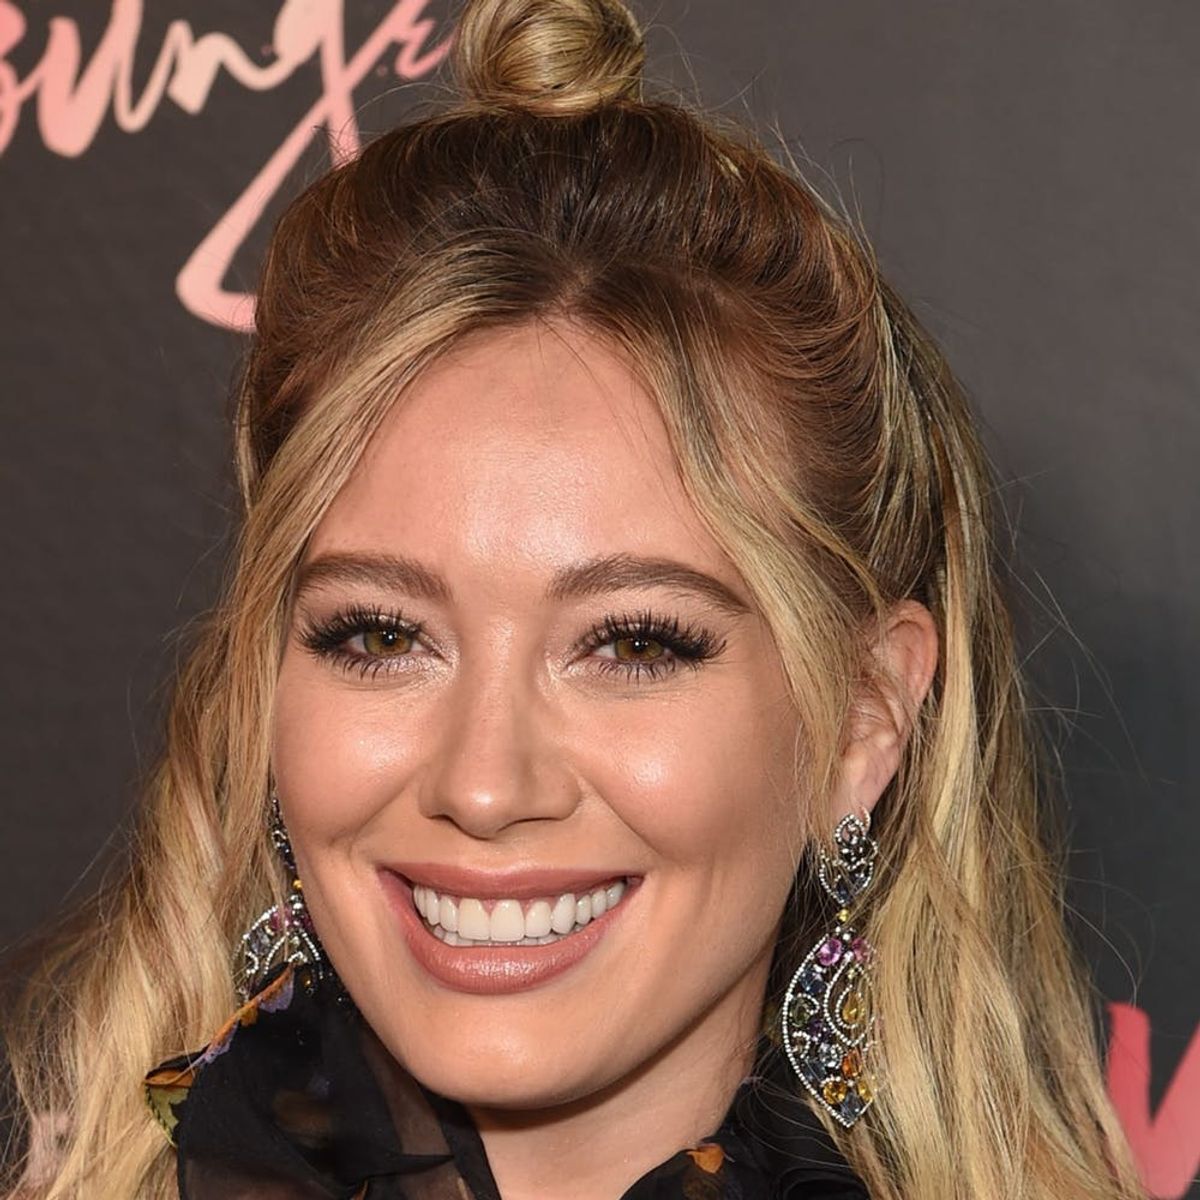 Here’s Your First Look at Hilary Duff As Sharon Tate